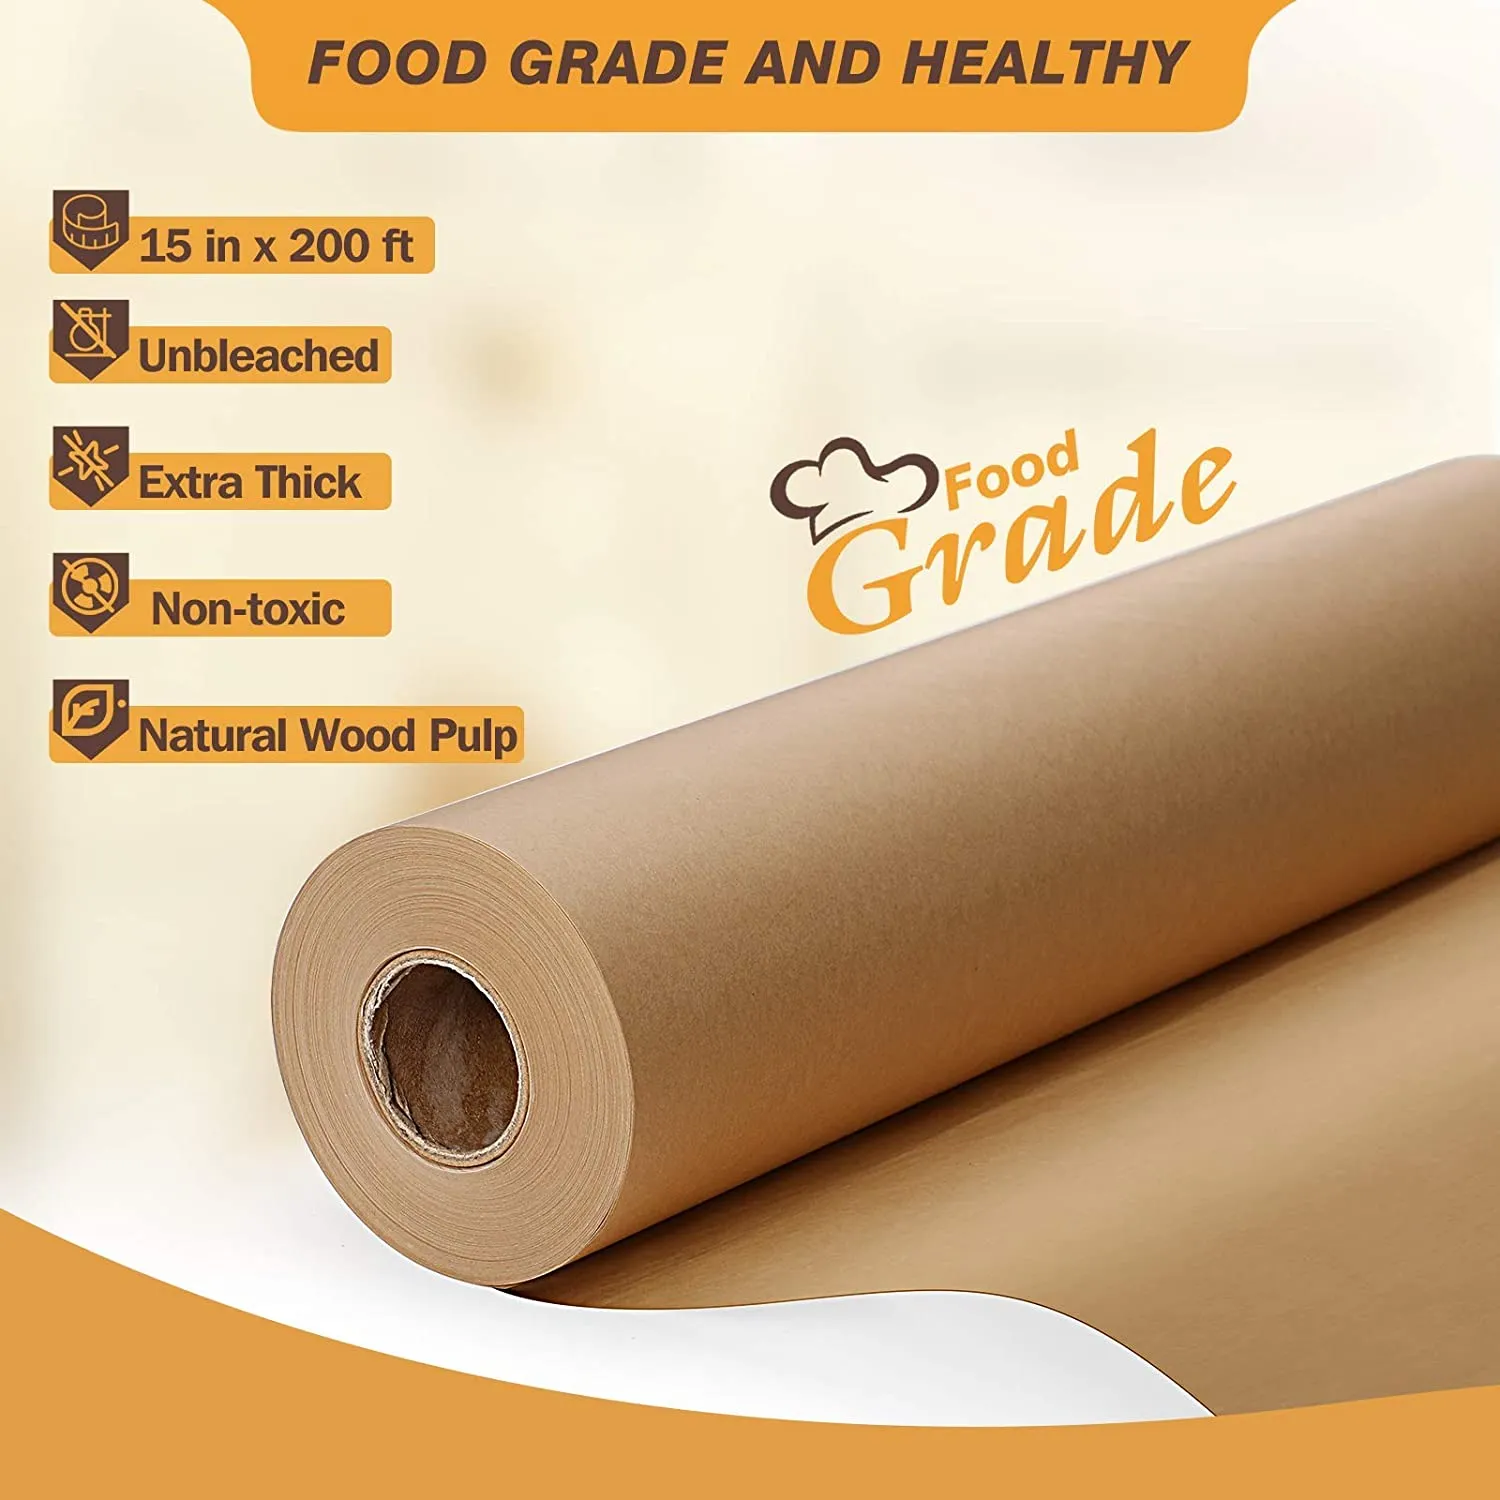 Unbleached Parchment Paper For Baking 15 In X 200 Ft 250 Sq Ft Baking Paper  Non Stick Parchment Paper Roll For Baking Cooking Grilling Instant Pot  Fryer Lid And Steaming From Allanhu, $7.7